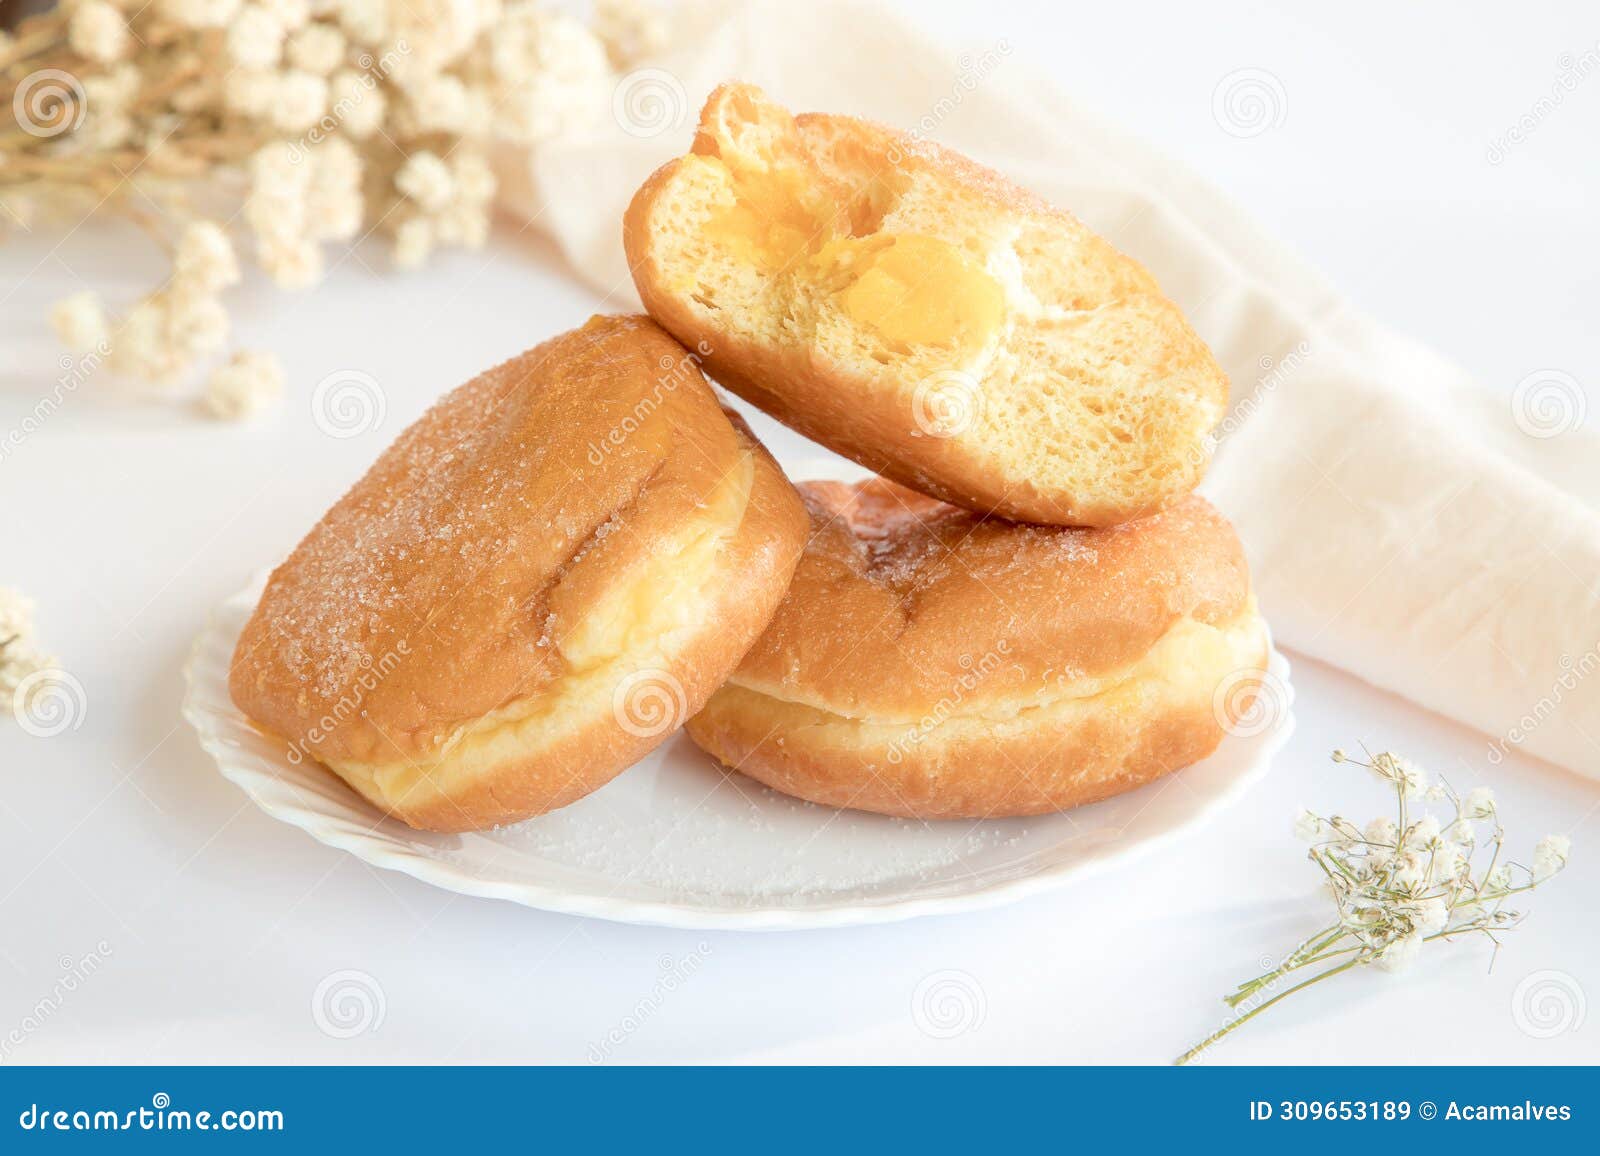 bolas de berlim, berliner or donuts filled with egg jam, a very popular dessert in portuguese pastry shops